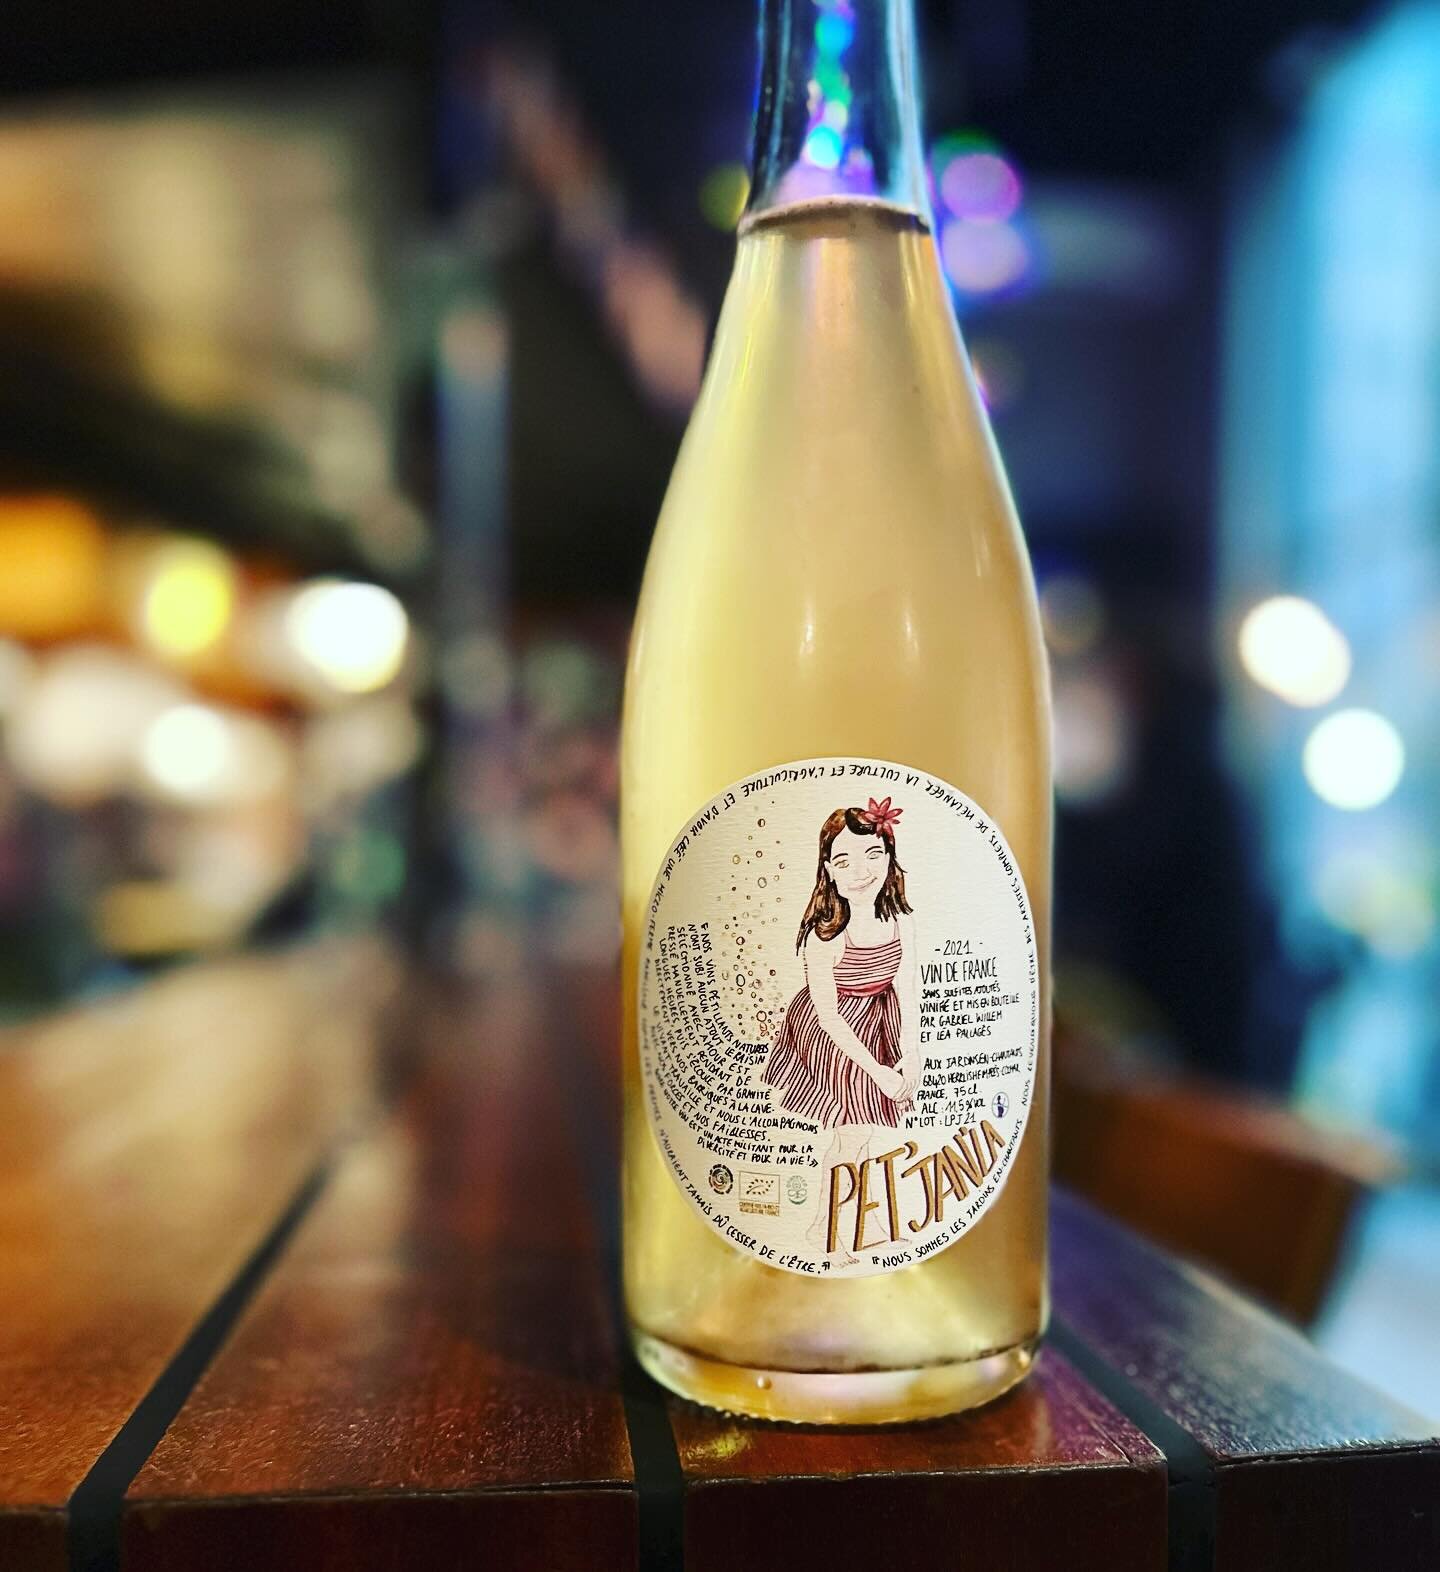 FINALLY got our hands on the lovely wines of @lesjardinsenchantants 🙌🏼🙌🏼🙌🏼

Come snag your next favorite glass of this exquisite pet nat &quot;Pet'Jan'La&quot; - made of Riesling &amp; Muscat grapes that #spinthebottle of flavor in your mouth -